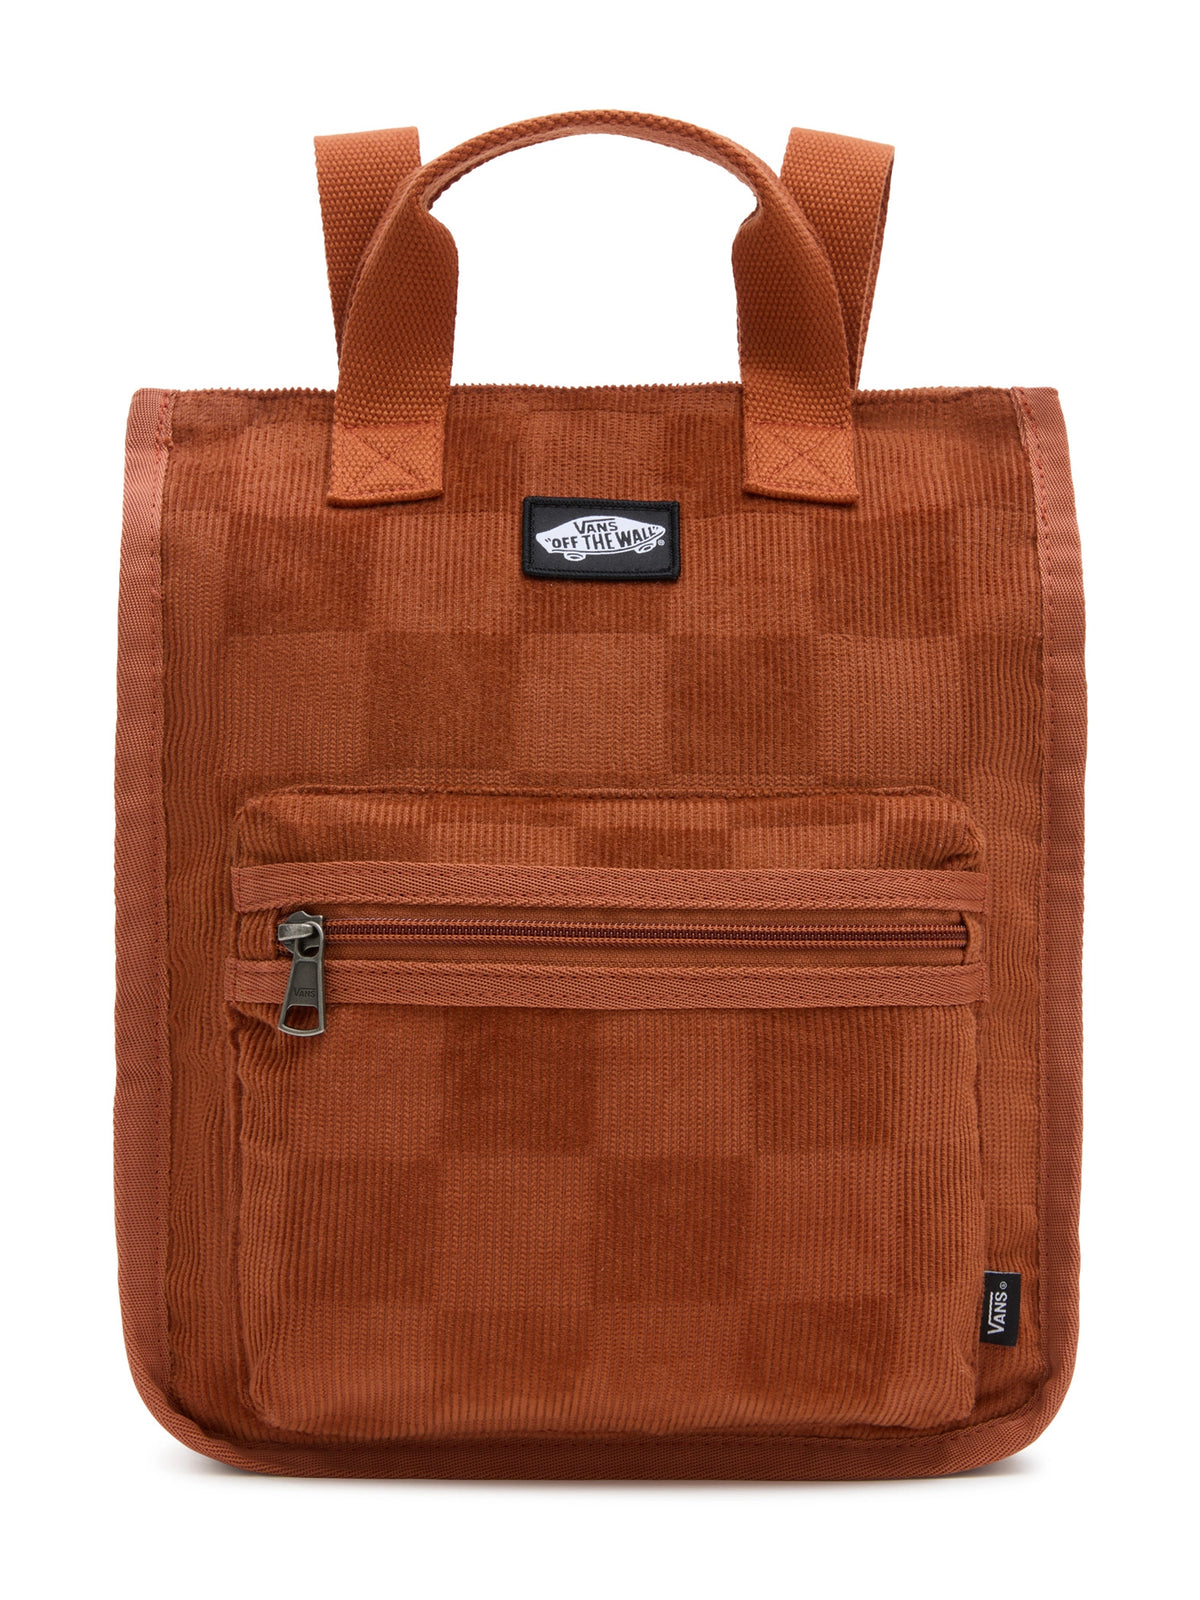 VANS FREE HAND BACKPACK | Boathouse Footwear Collective